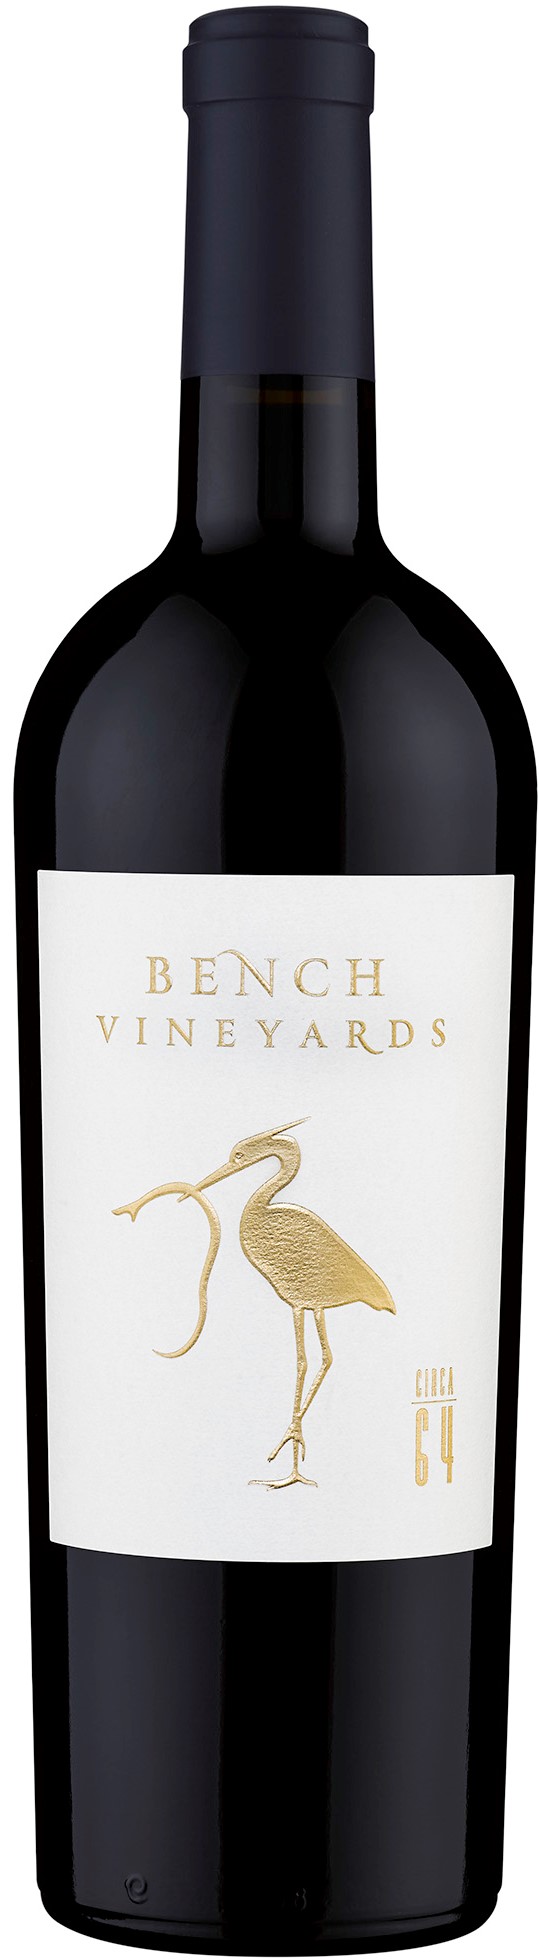 Product Image for 2019 Bench Vineyards "Circa 64" Red Wine, SLD